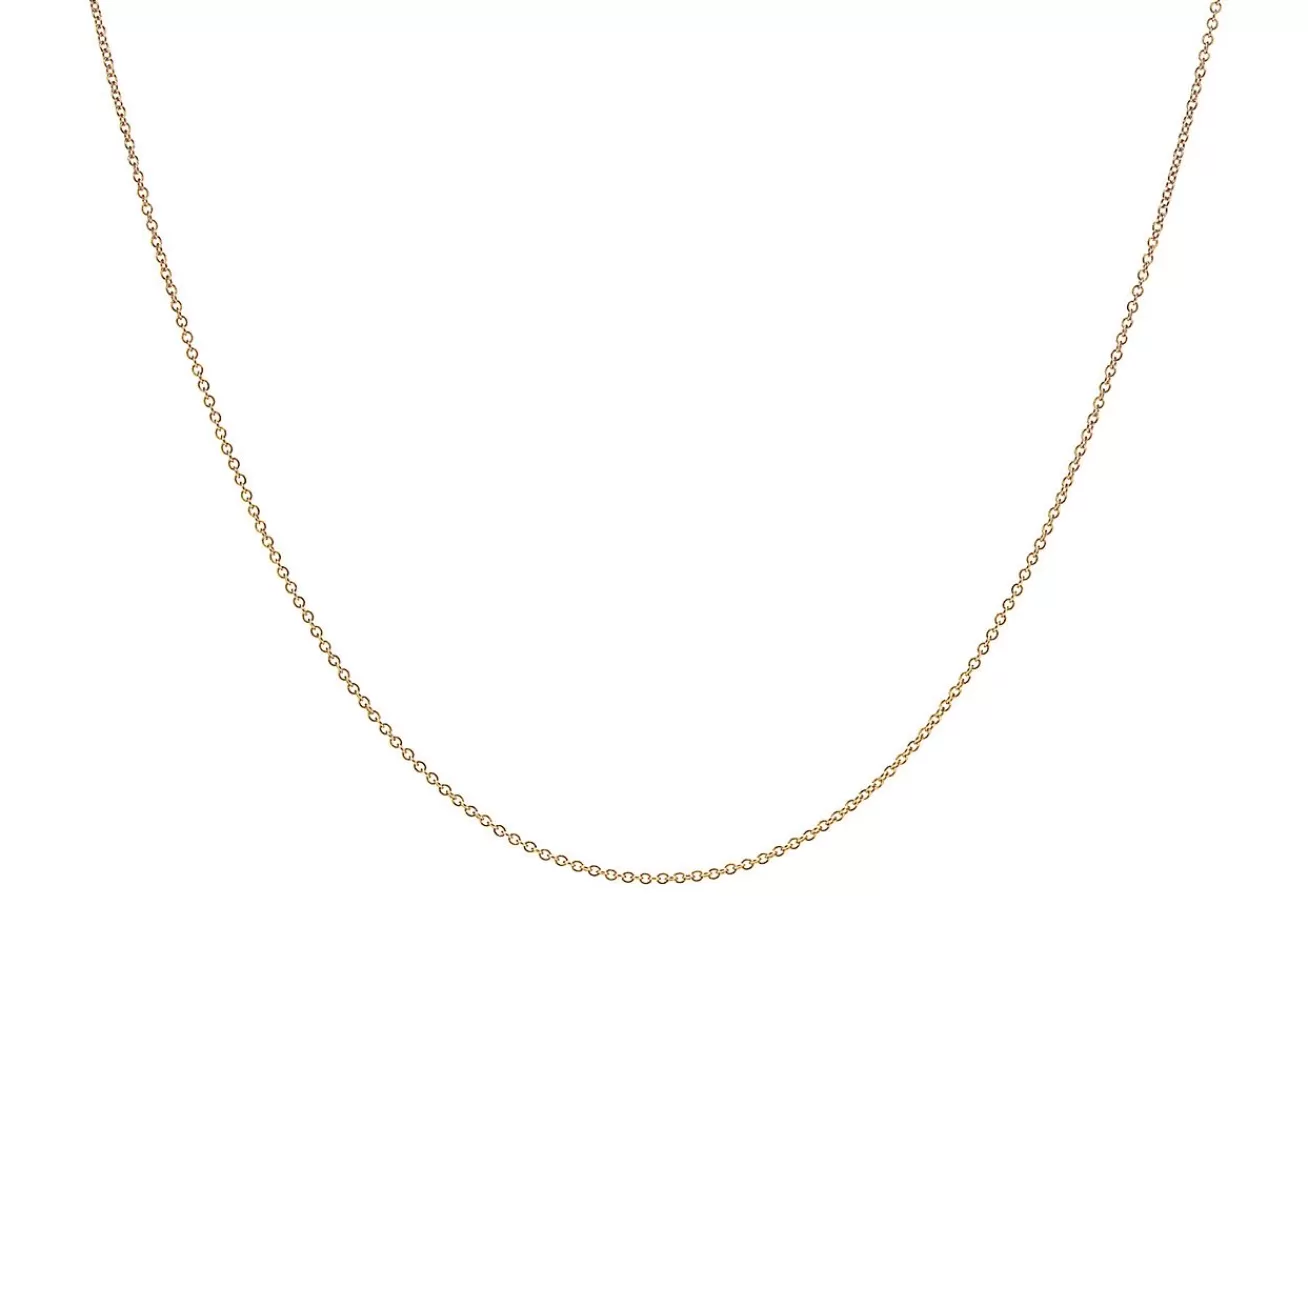 Tiffany & Co. Chain Necklace in Yellow Gold, 18" | ^ Necklaces & Pendants | Gold Jewelry